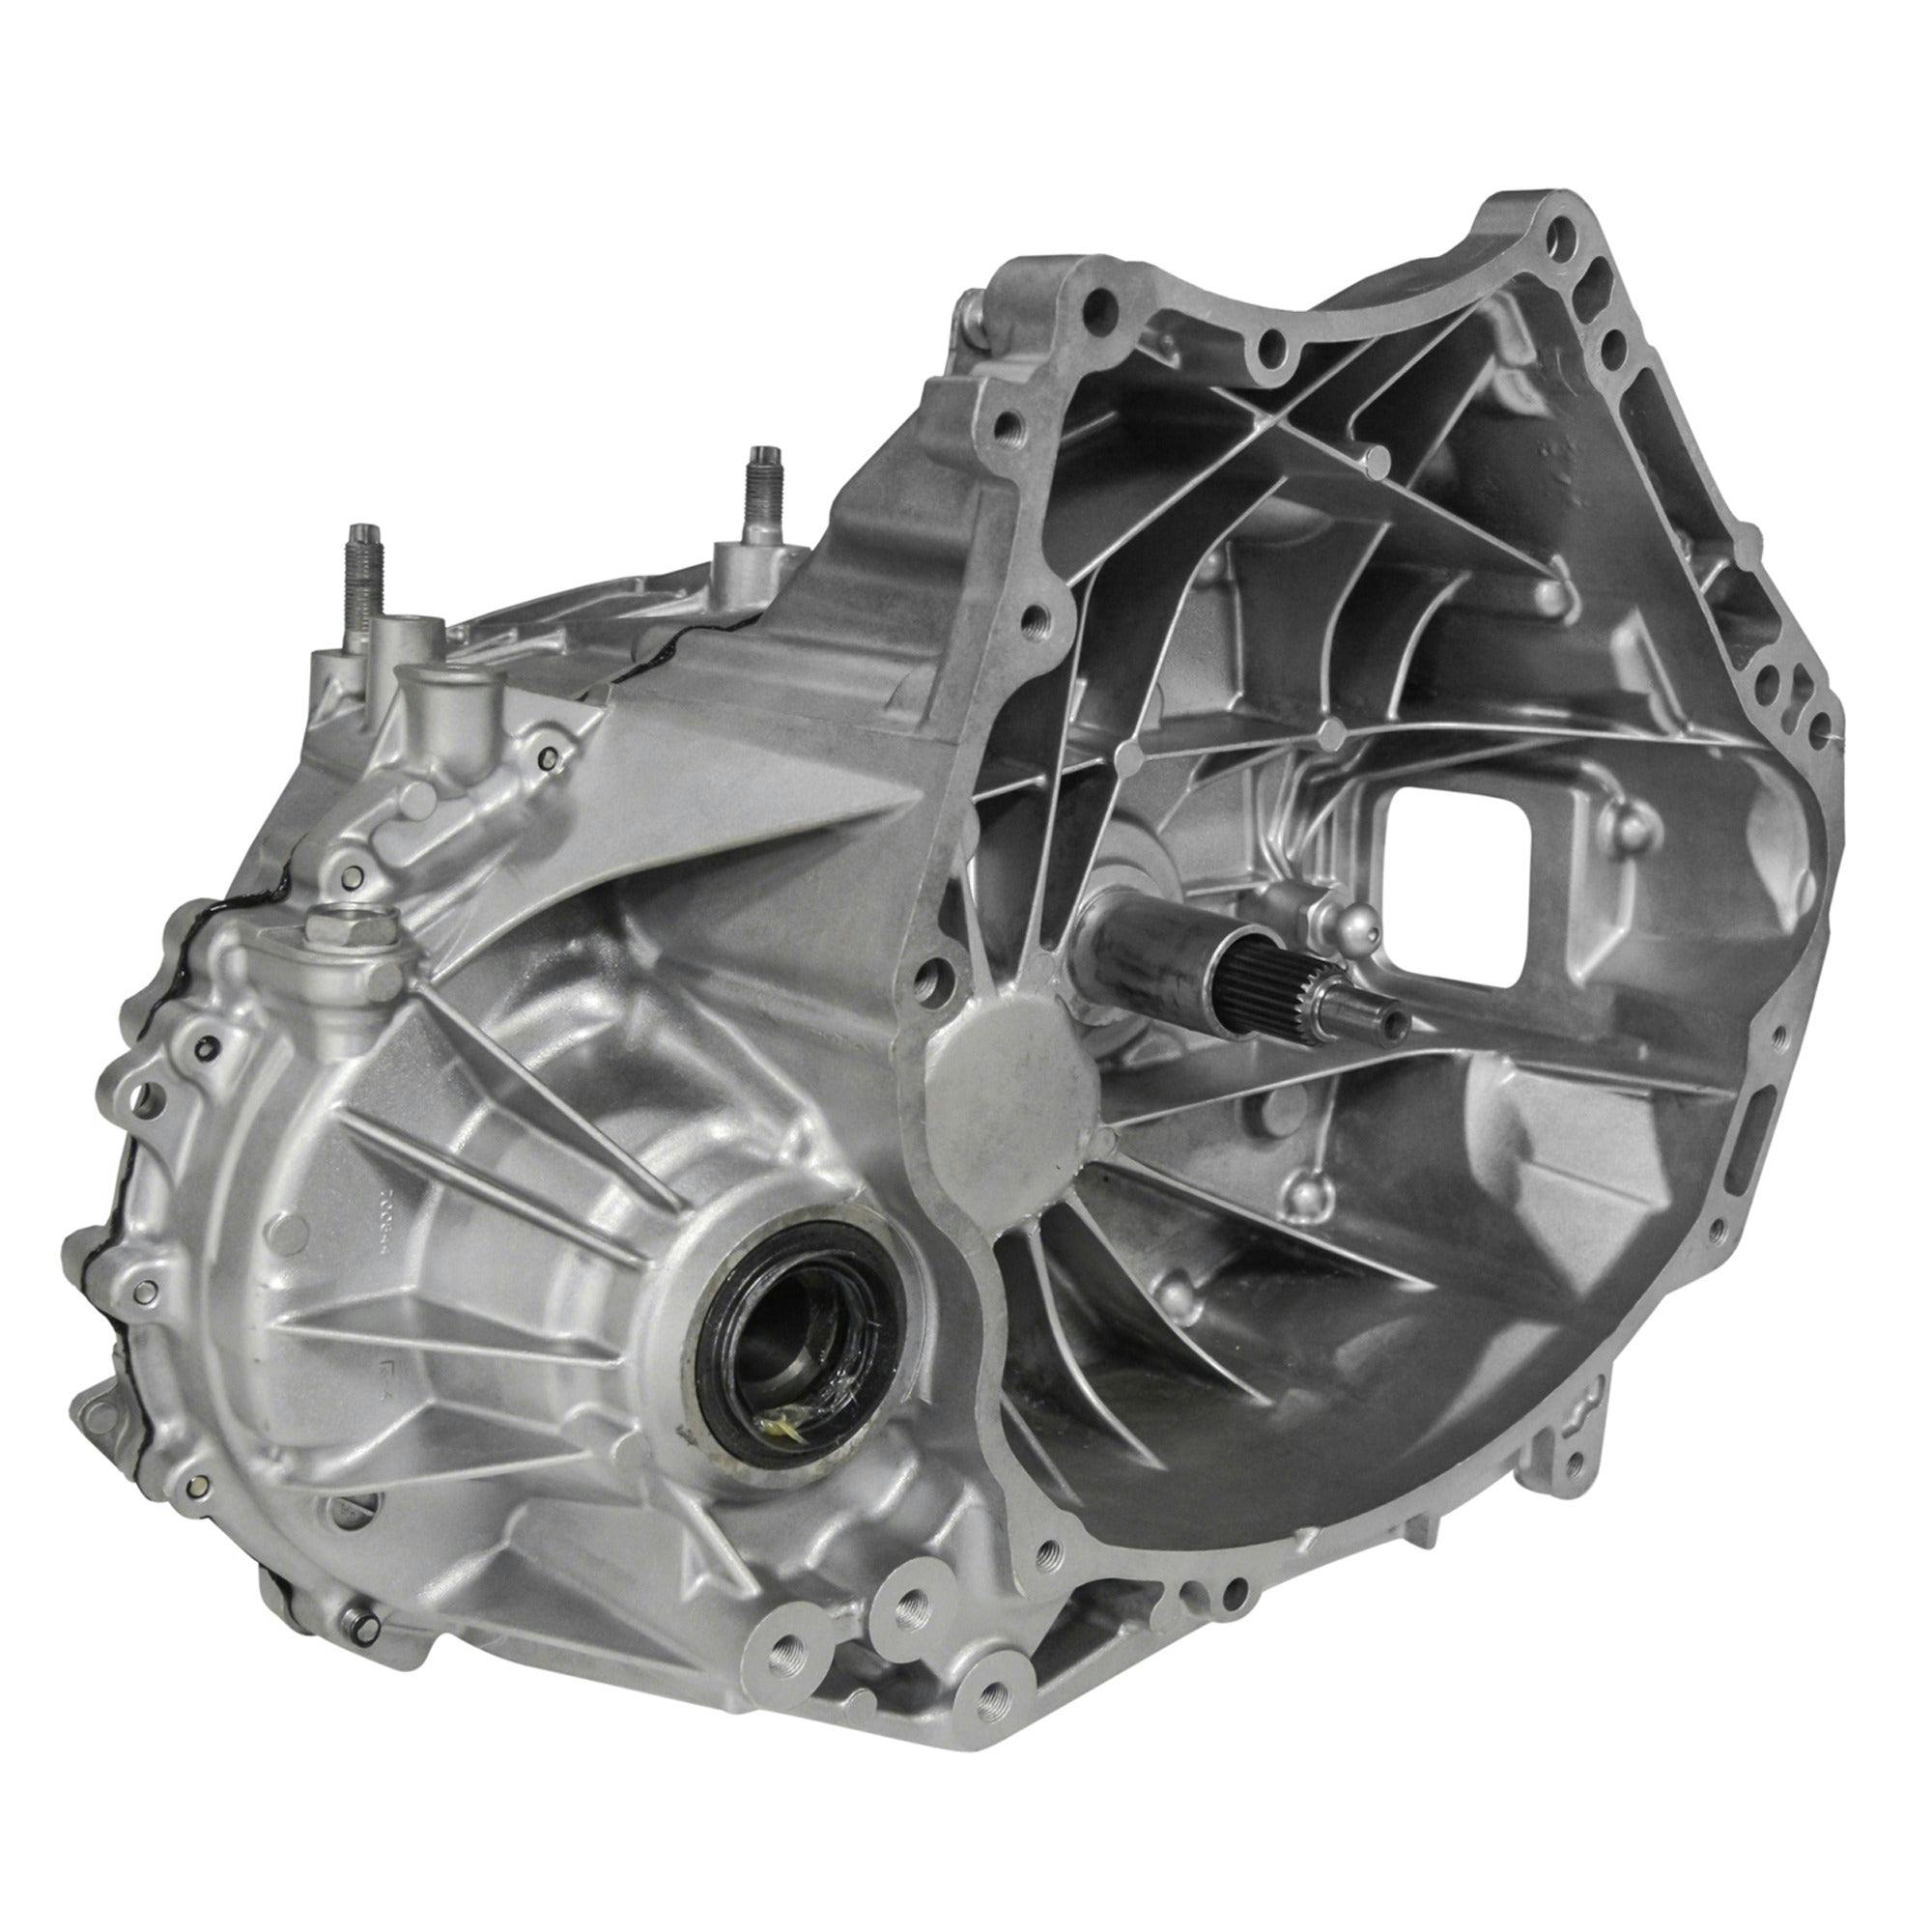 Manual Transmission for 2012-2014 Mazda 3 FWD with 2L Inline-4 Engine